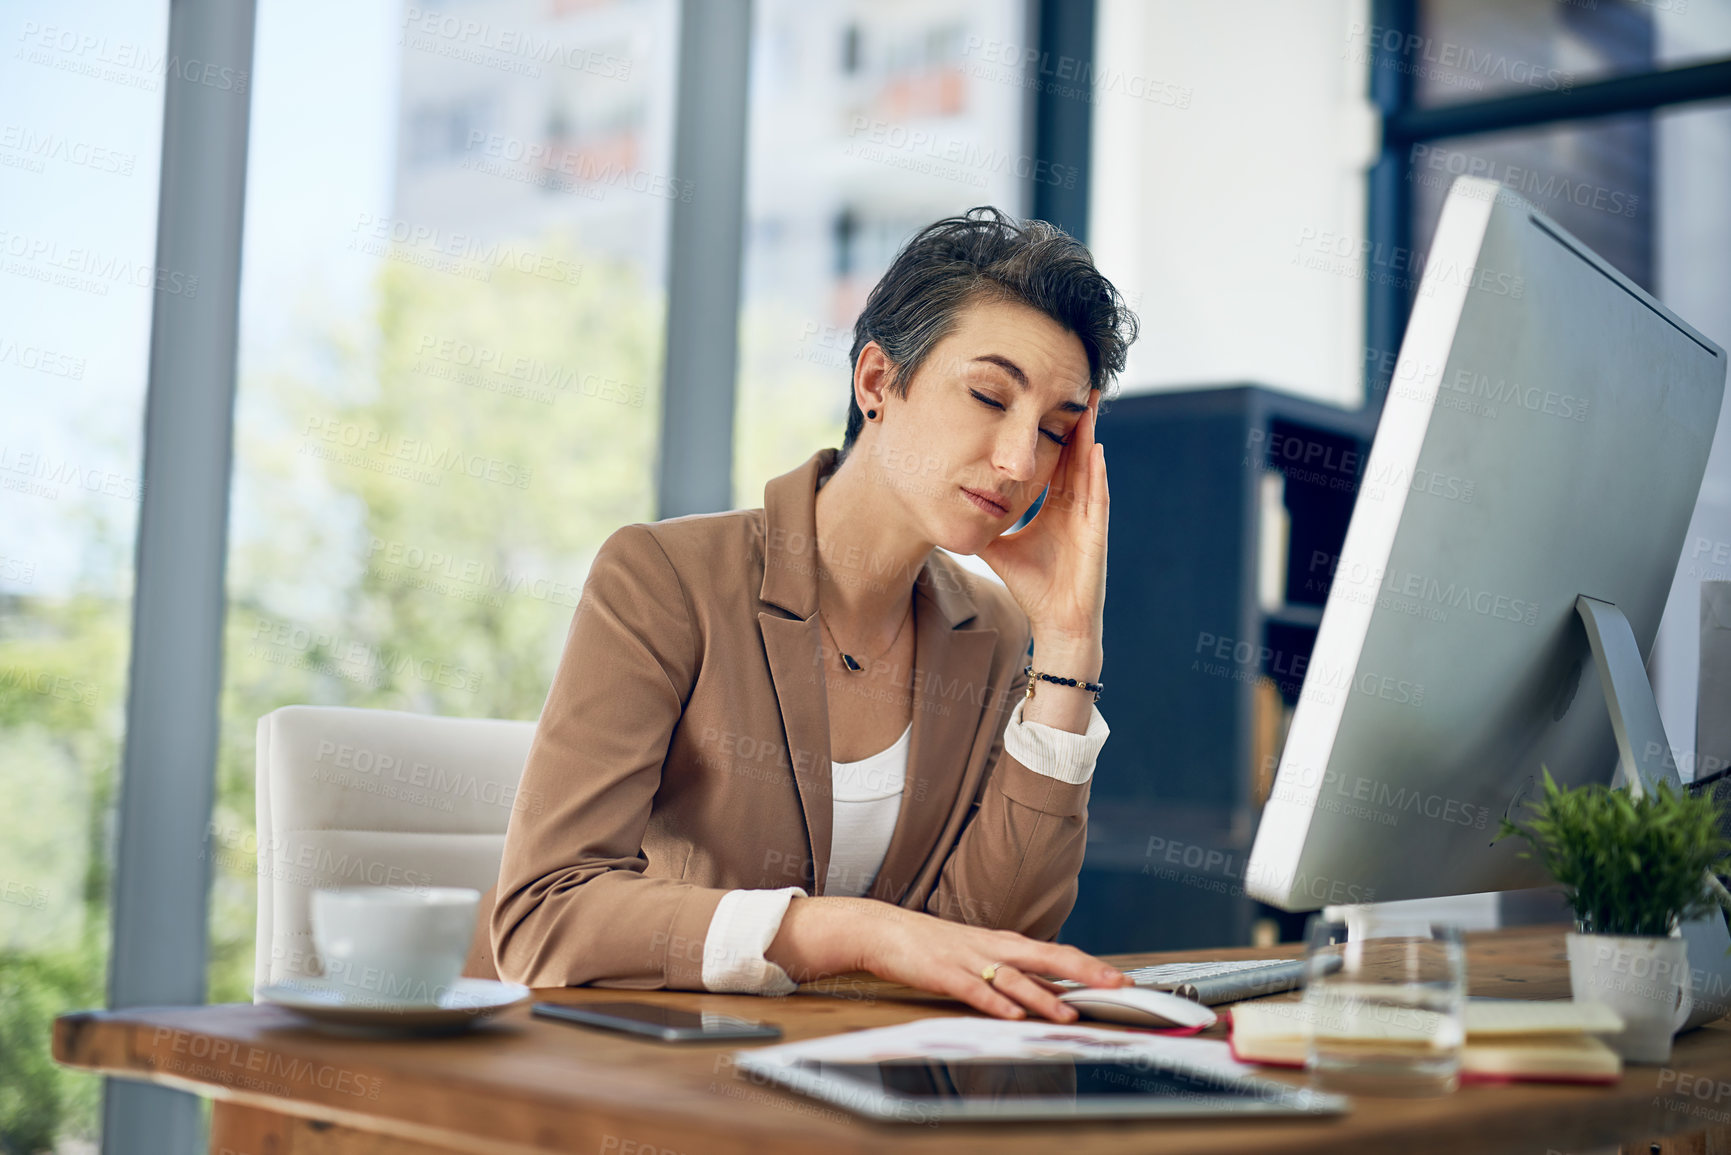 Buy stock photo Shot of a businesswoman looking stressed out while working in an office